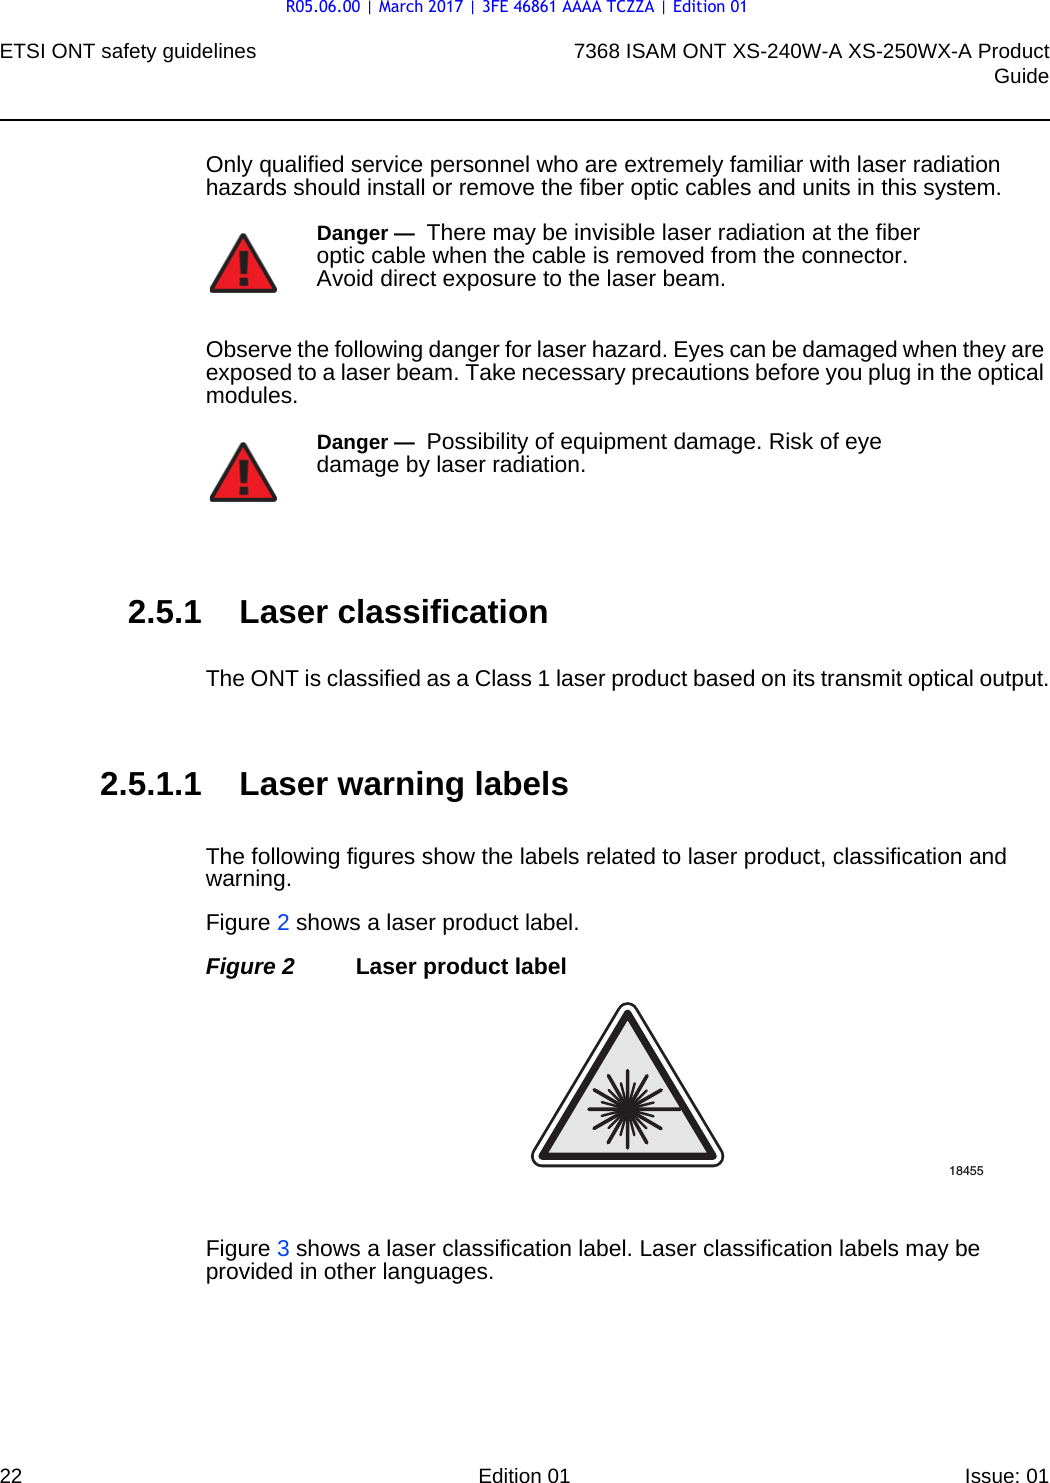 ETSI ONT safety guidelines227368 ISAM ONT XS-240W-A XS-250WX-A ProductGuideEdition 01 Issue: 01 Only qualified service personnel who are extremely familiar with laser radiation hazards should install or remove the fiber optic cables and units in this system.Observe the following danger for laser hazard. Eyes can be damaged when they are exposed to a laser beam. Take necessary precautions before you plug in the optical modules.2.5.1 Laser classificationThe ONT is classified as a Class 1 laser product based on its transmit optical output.2.5.1.1 Laser warning labelsThe following figures show the labels related to laser product, classification and warning. Figure 2 shows a laser product label.Figure 2 Laser product labelFigure 3 shows a laser classification label. Laser classification labels may be provided in other languages.Danger —  There may be invisible laser radiation at the fiber optic cable when the cable is removed from the connector. Avoid direct exposure to the laser beam.Danger —  Possibility of equipment damage. Risk of eye damage by laser radiation.18455R05.06.00 | March 2017 | 3FE 46861 AAAA TCZZA | Edition 01